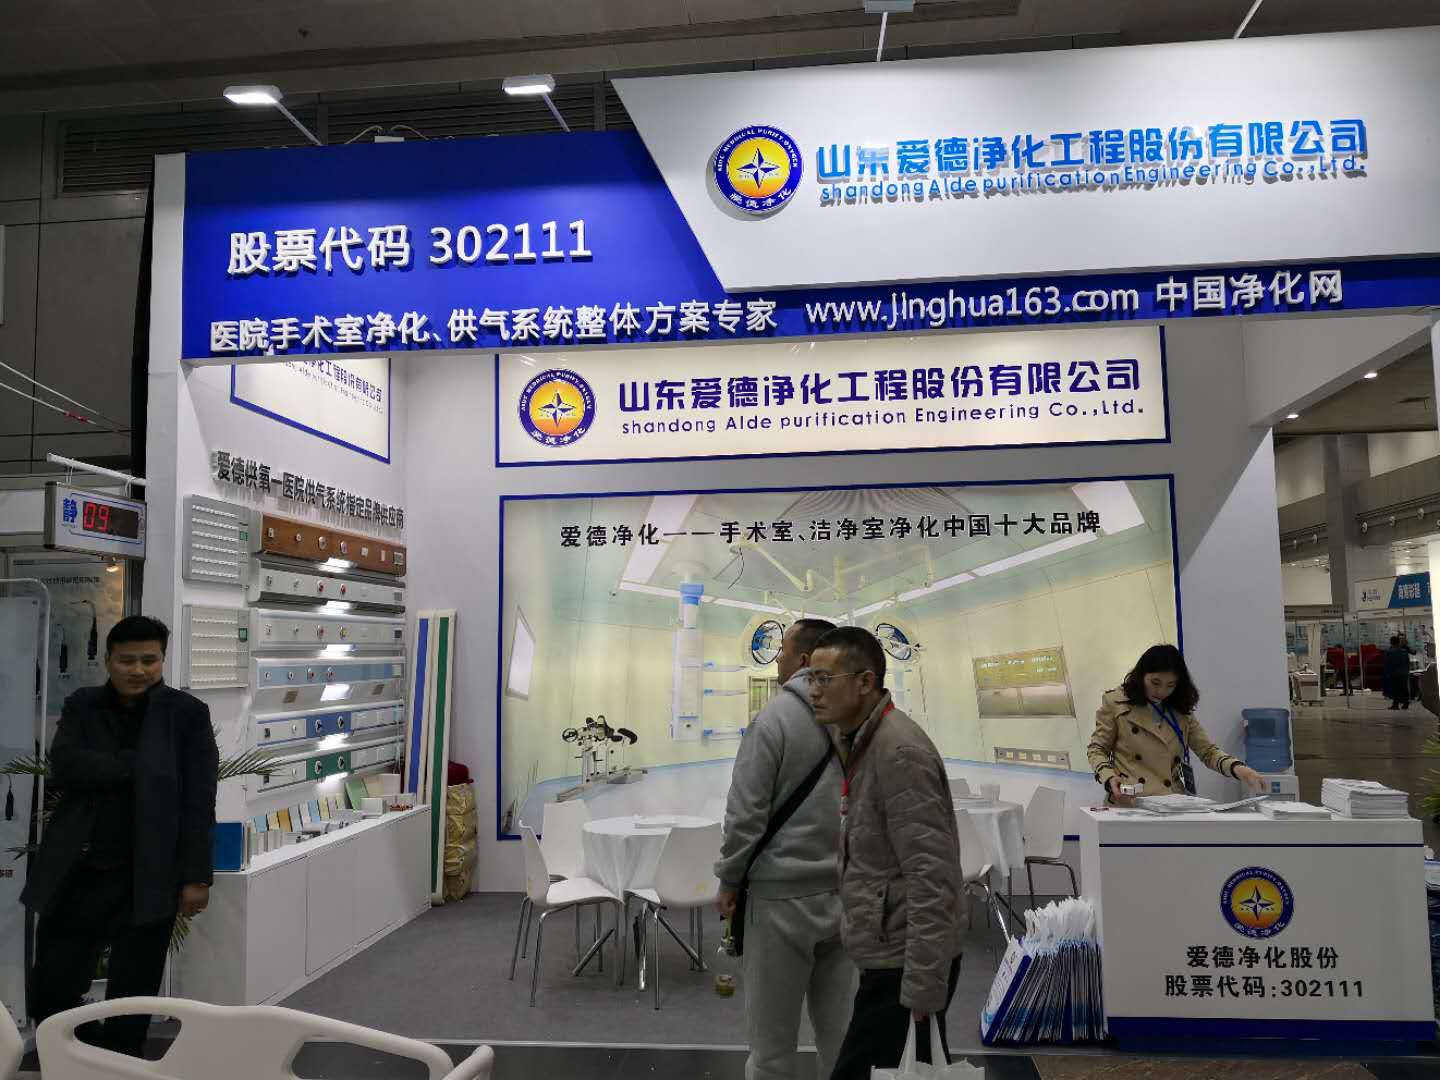 Aide purification shares participated in the 34th Hubei (Wuhan) International Advanced Medical Instrument Exhibition